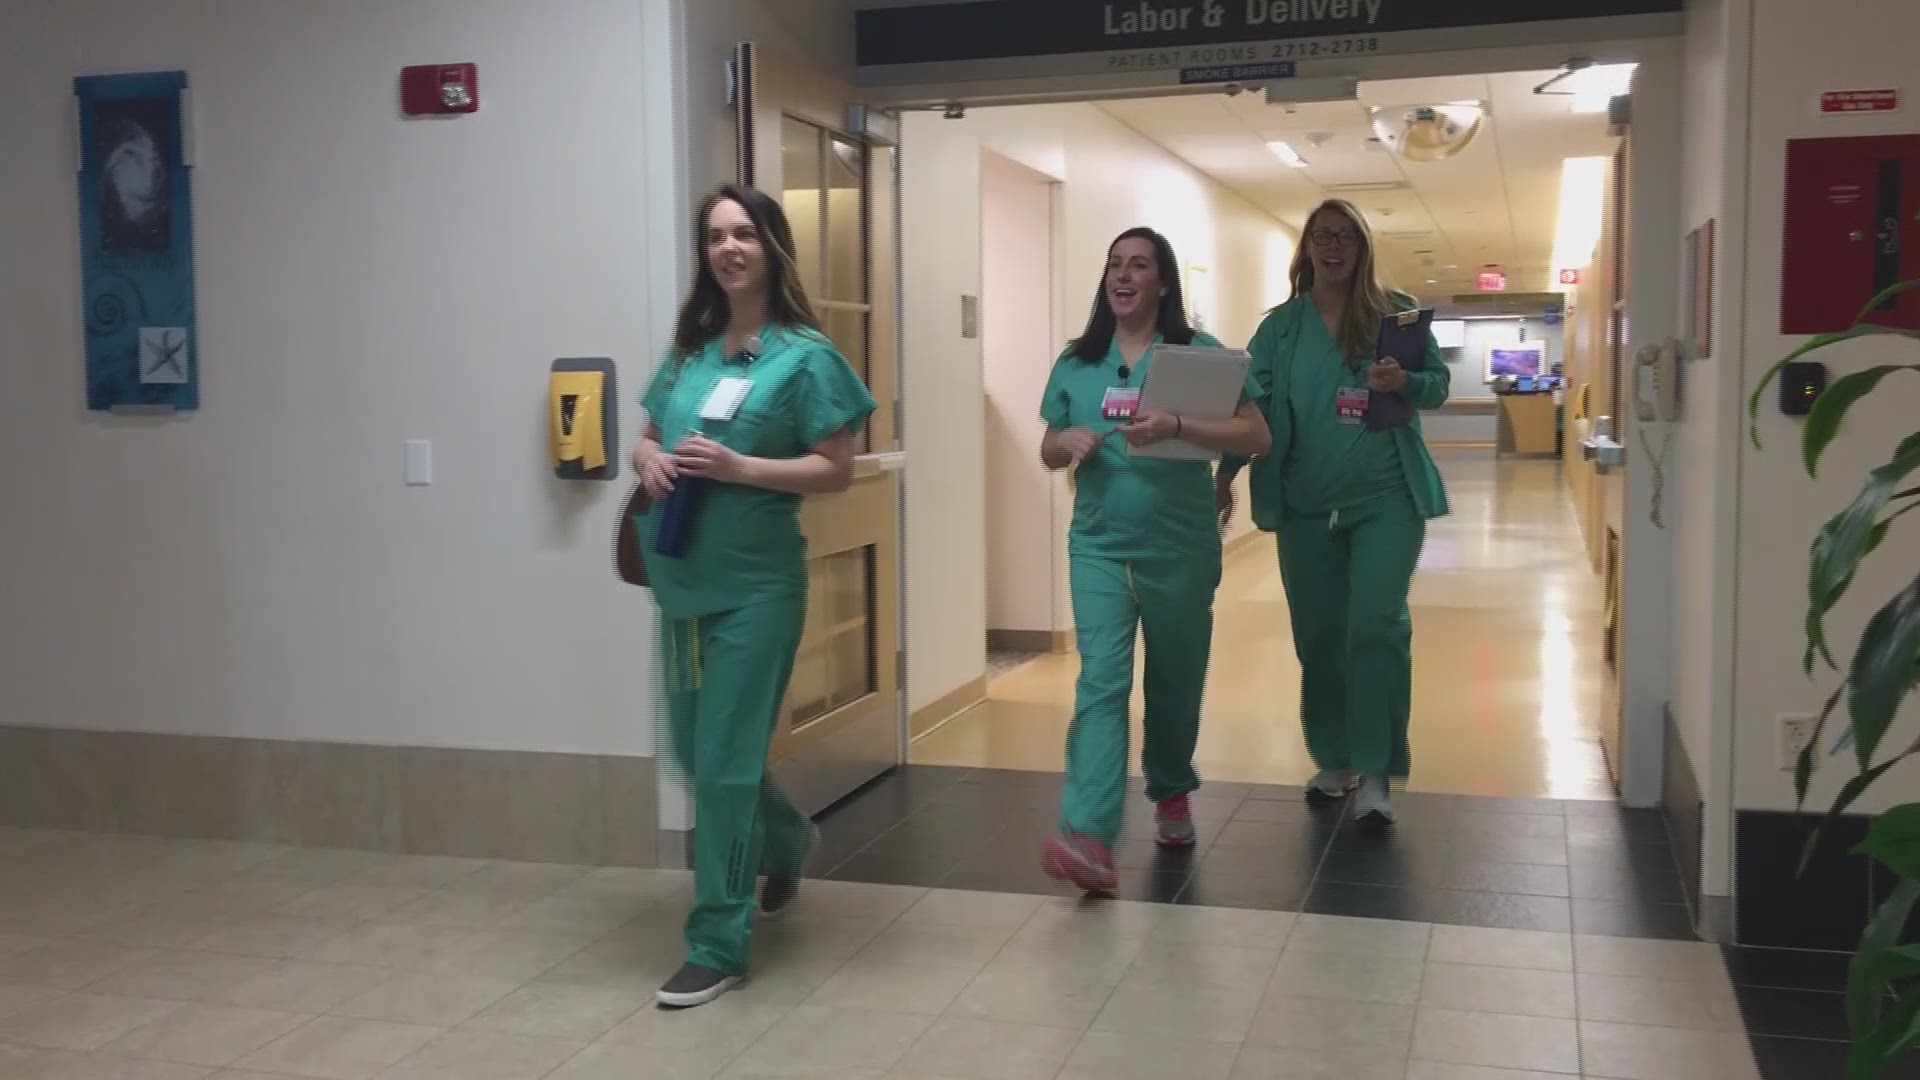 Nine labor and delivery nurses are pregnant at the same time at Maine Medical Center.